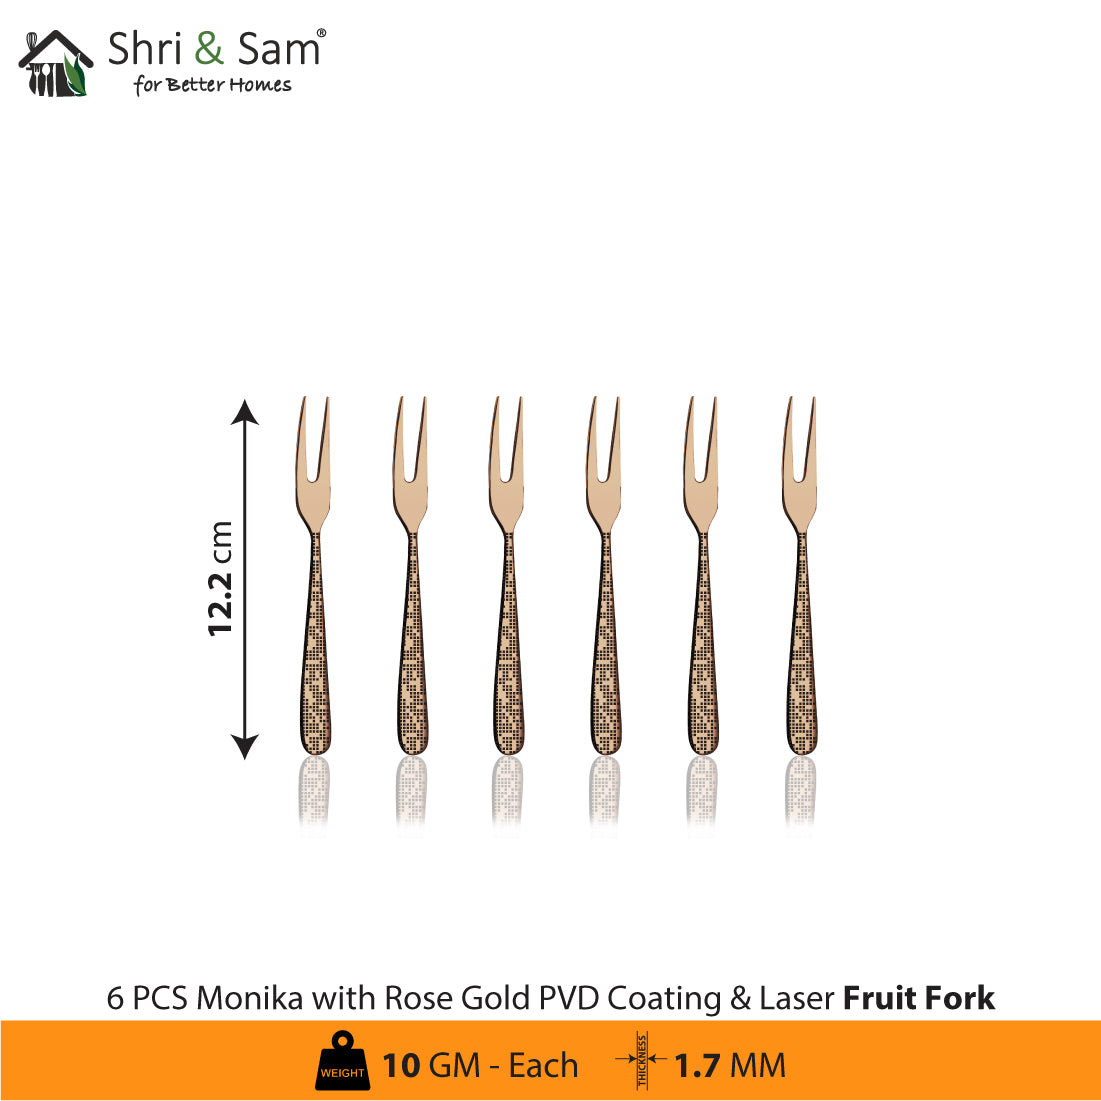 Stainless Steel Cutlery with Rose Gold PVD Coating & Laser Monika